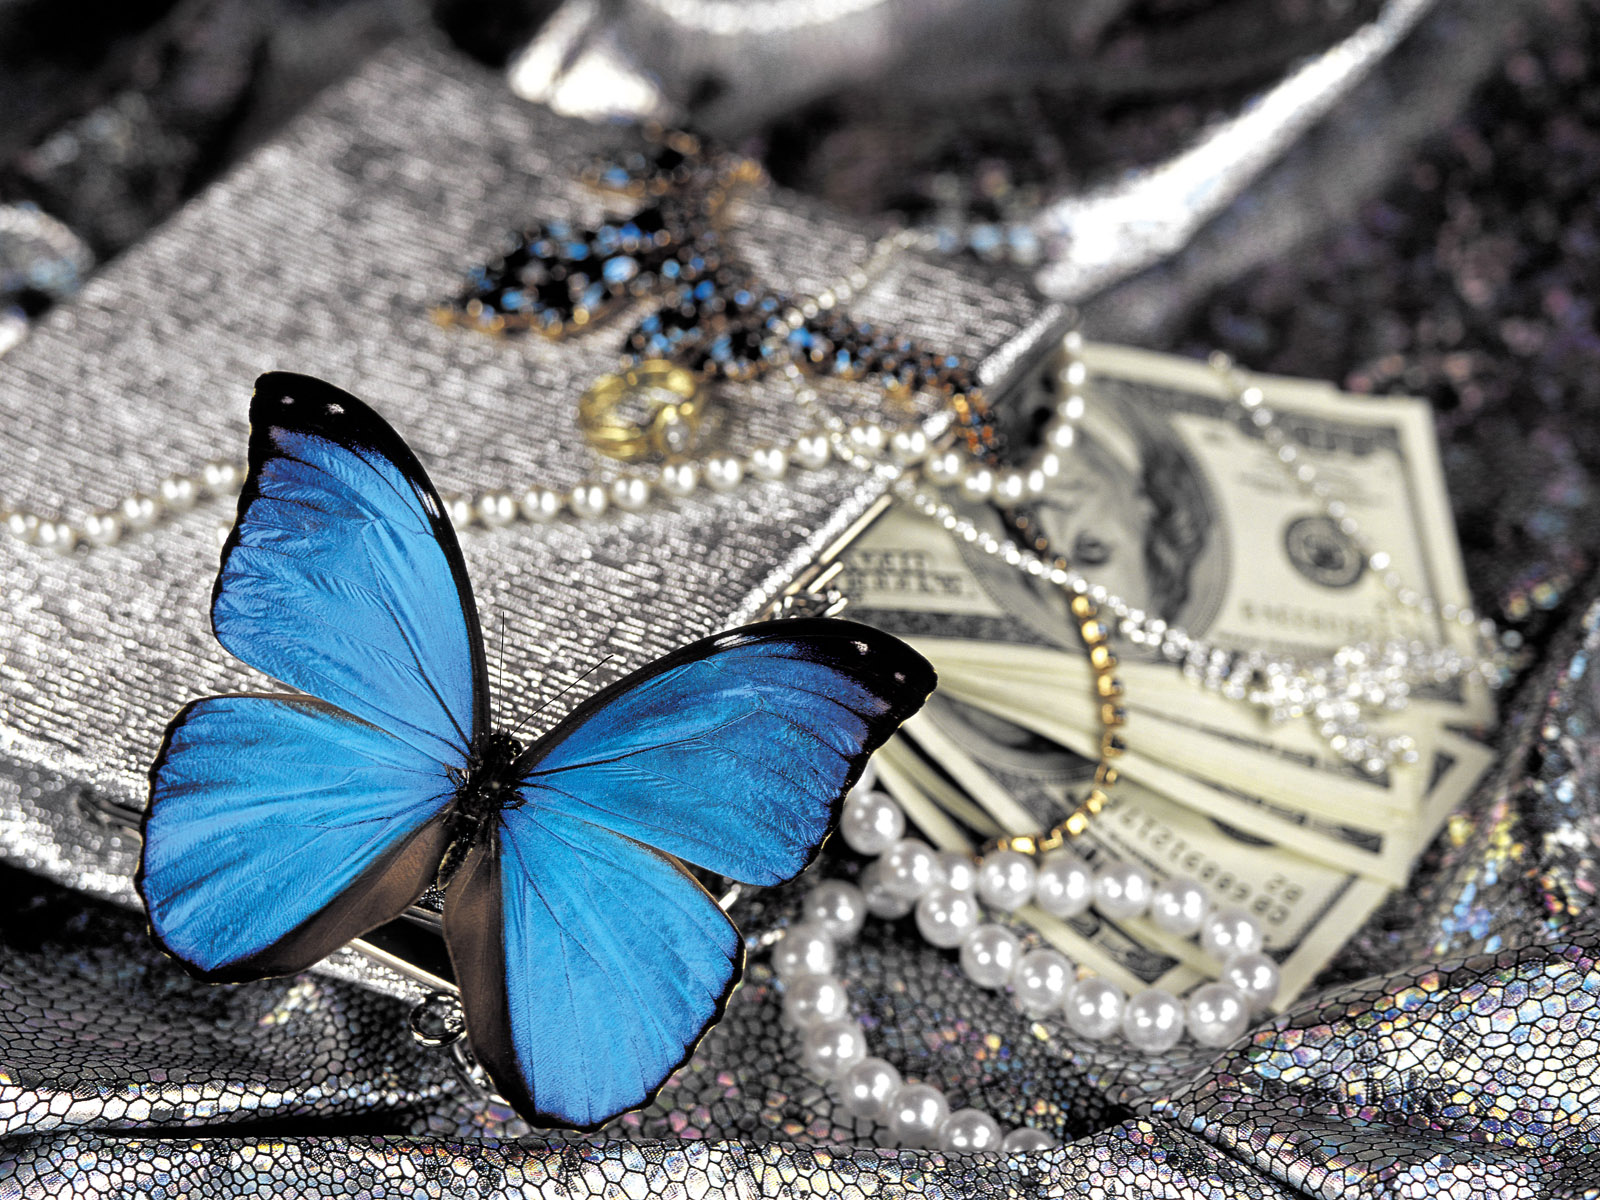 Blue & Black Butterfly - Blue Butterfly Cover Photos For Facebook - HD Wallpaper 